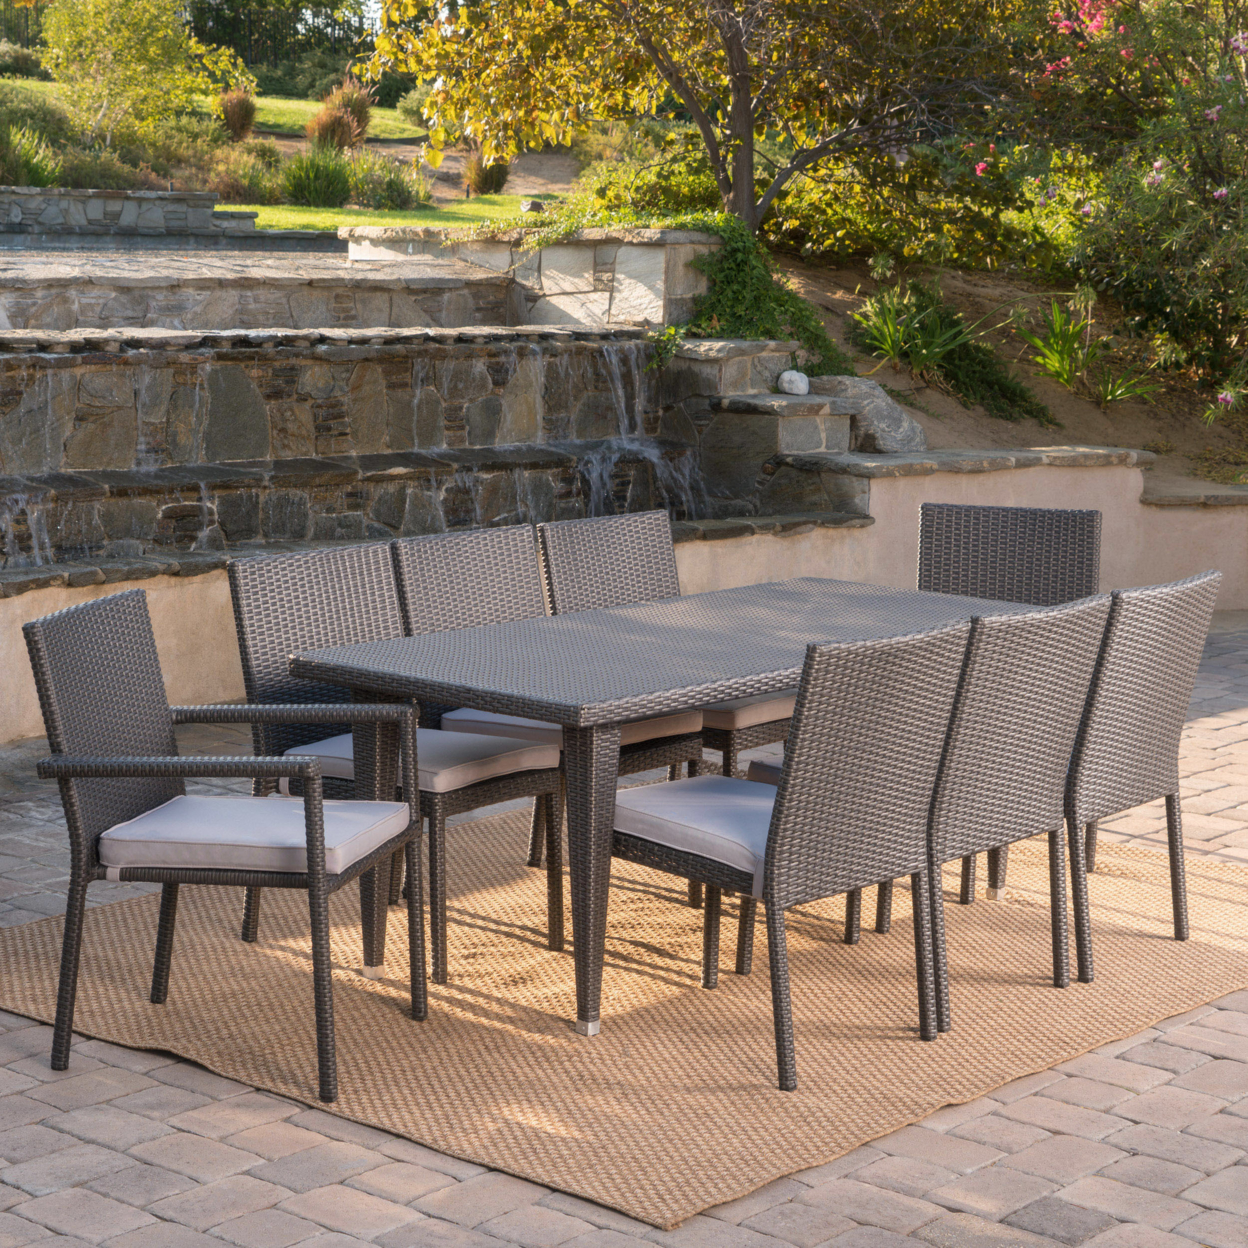 Grand Outdoor 9 Piece Wicker Dining Set With Water Resistant Cushions - Multi-brown/Textured Beige